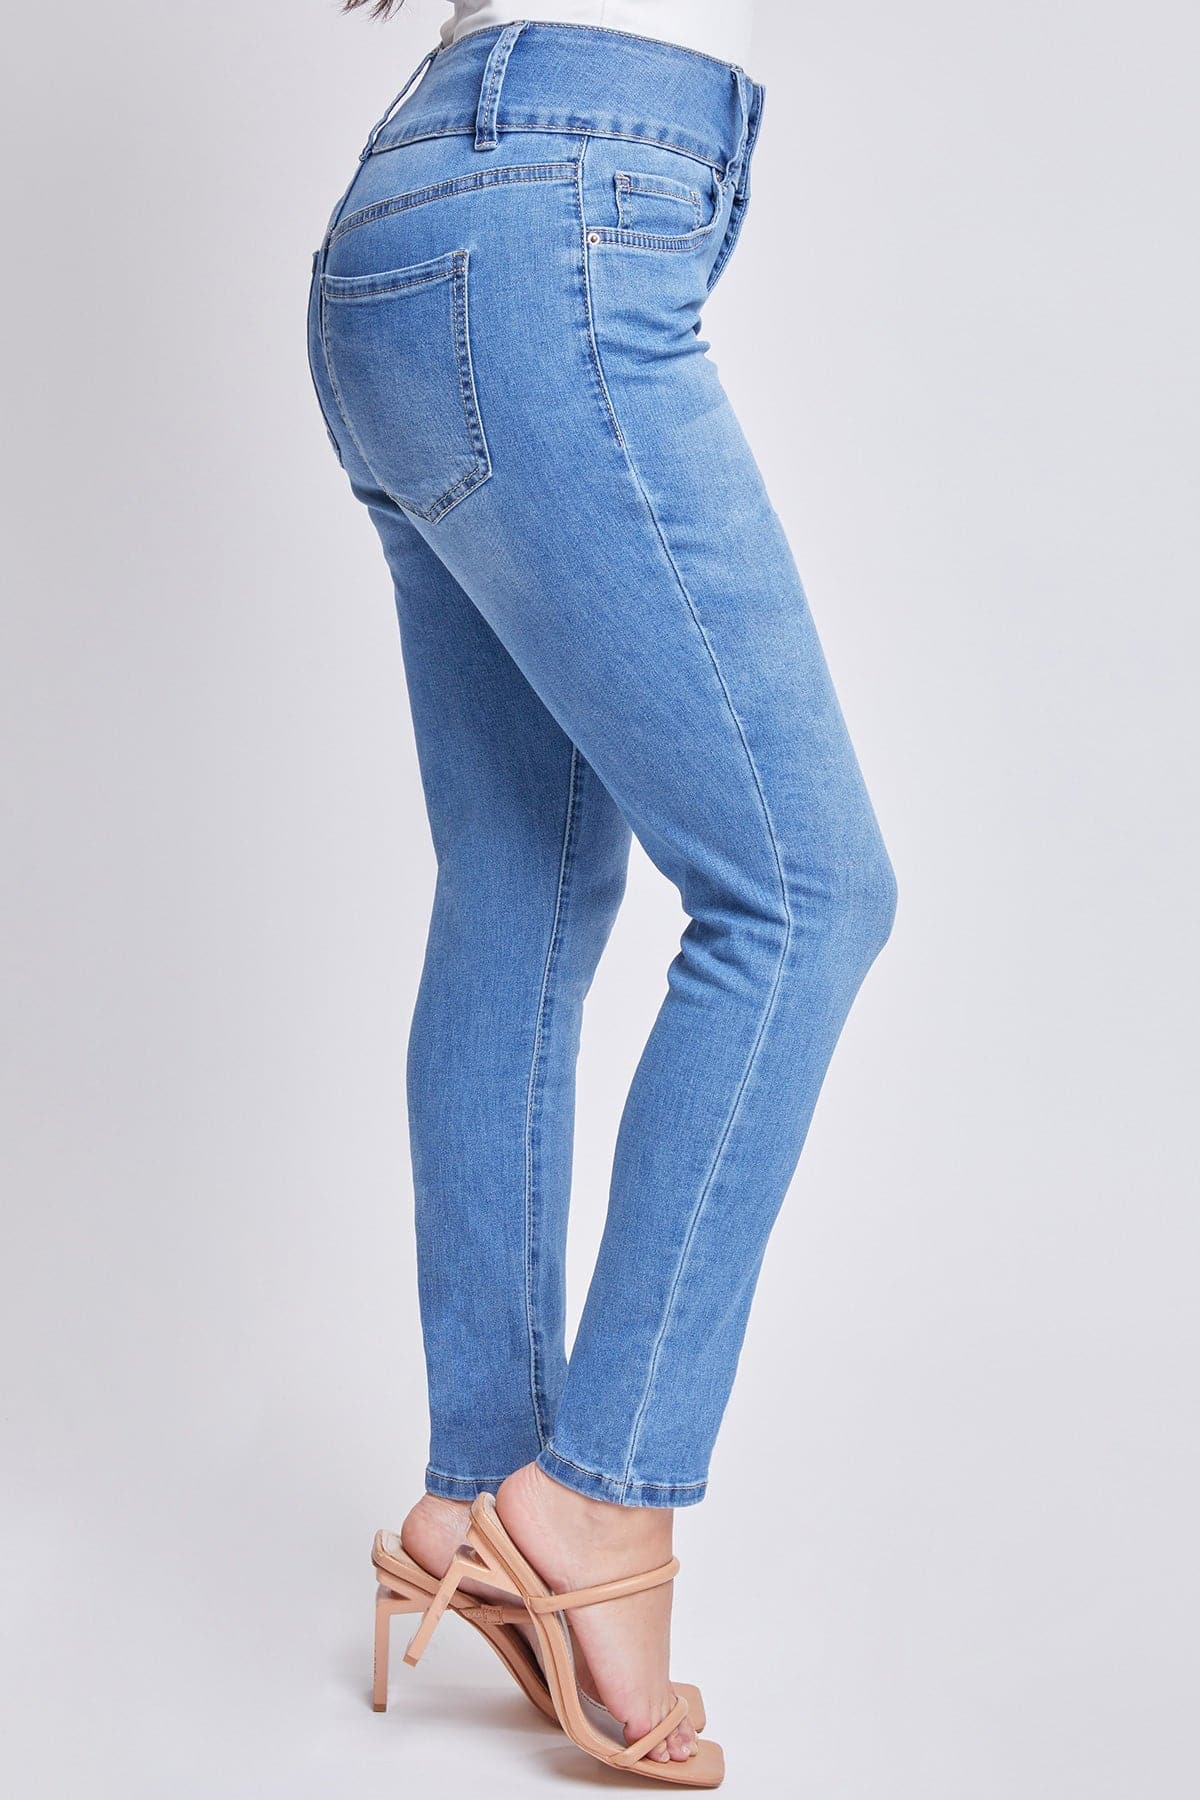 Women's Essential 3 Button High Rise Skinny Jean with Functional Front Pockets